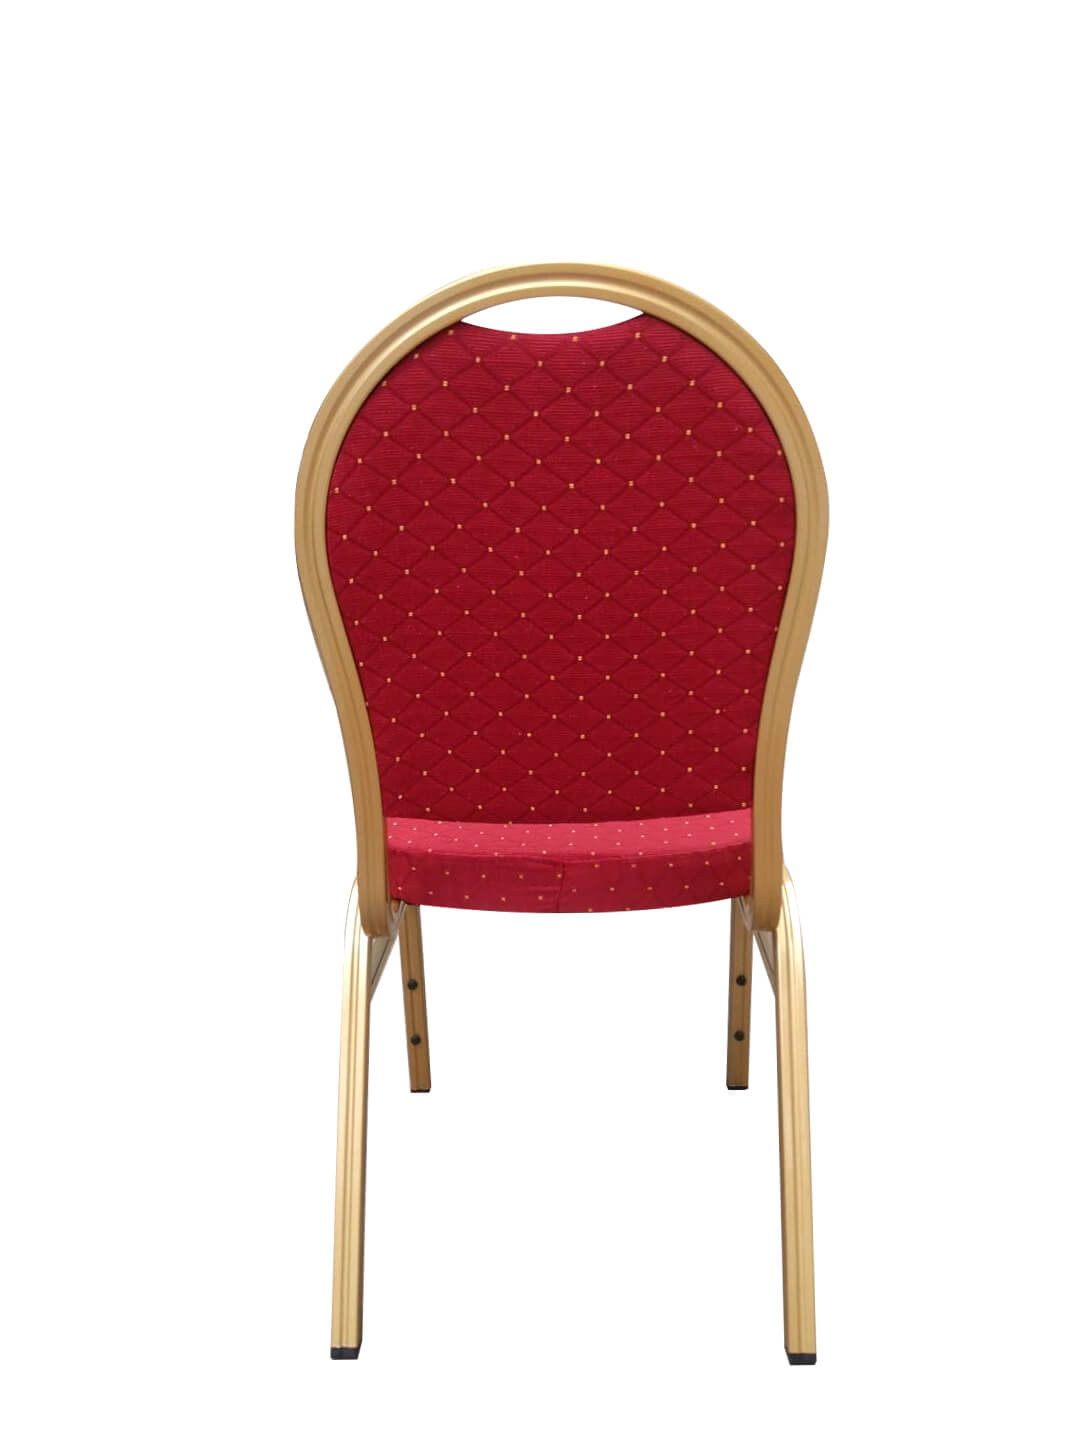 banquet chairs Wholesale and banquet Conference Chairs ...